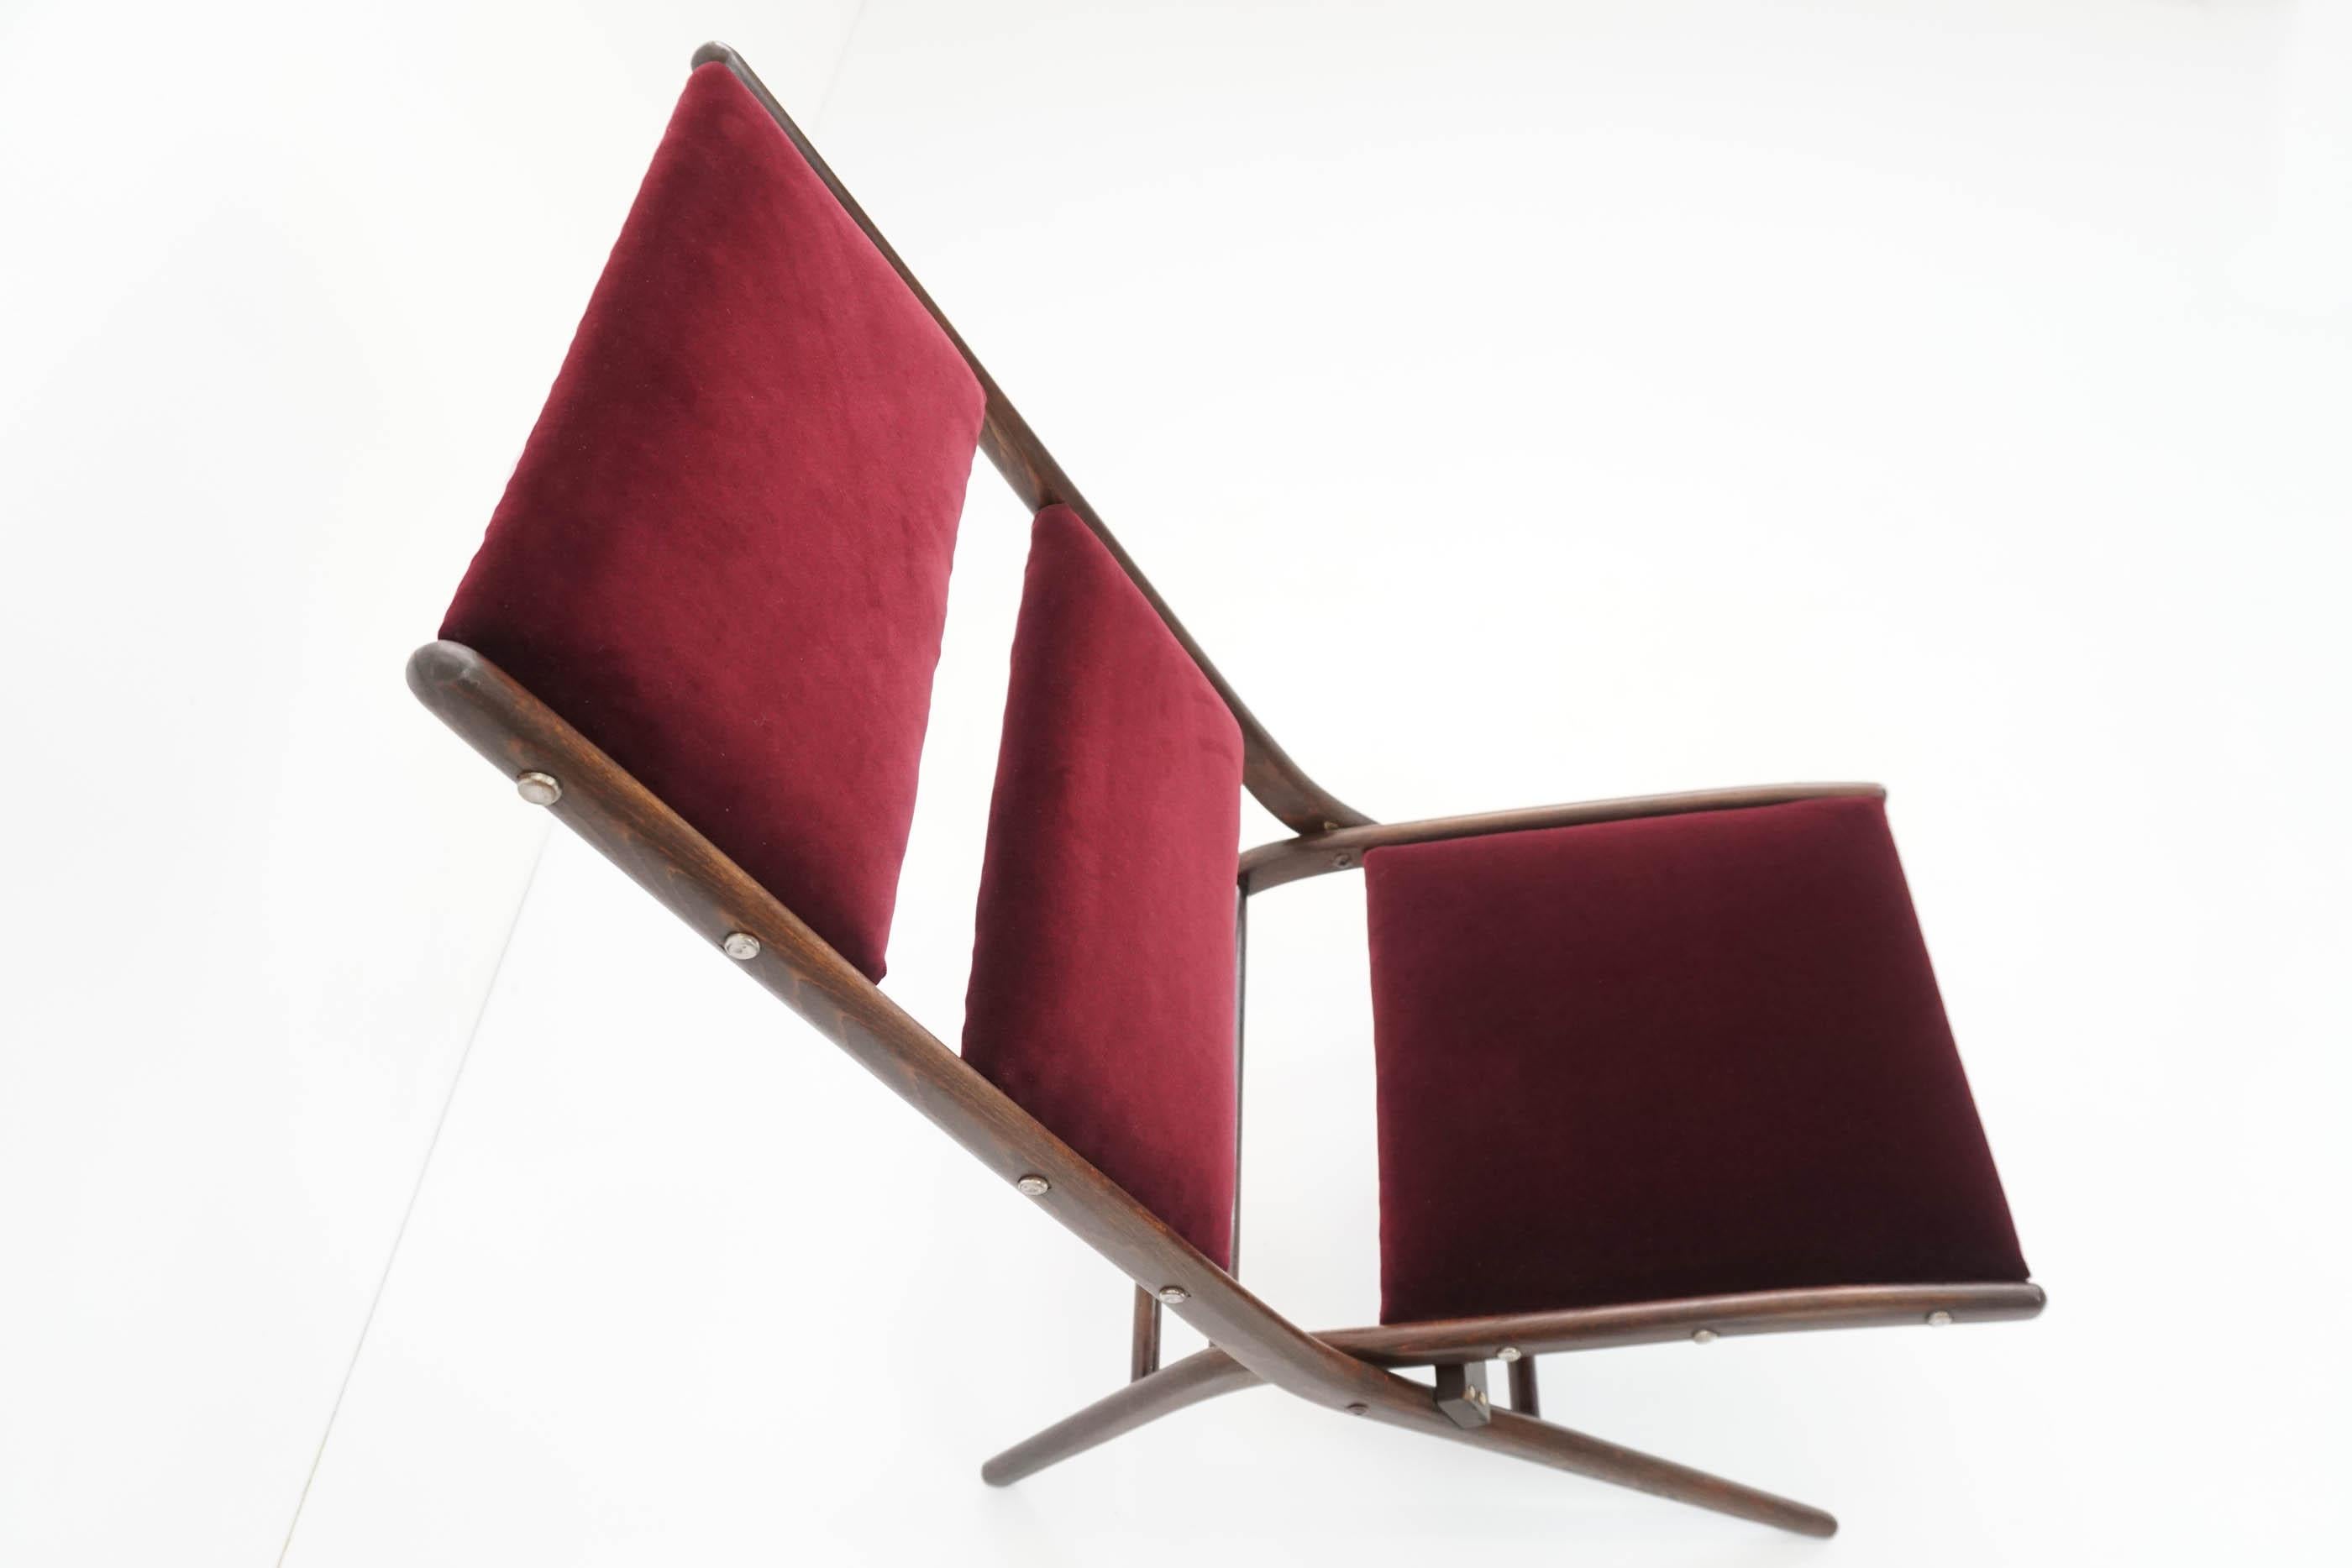 Upholstery Rare Iconic Augusto Romano Pliable Lounge Chairs Mod. Congo, 1950 Italy For Sale